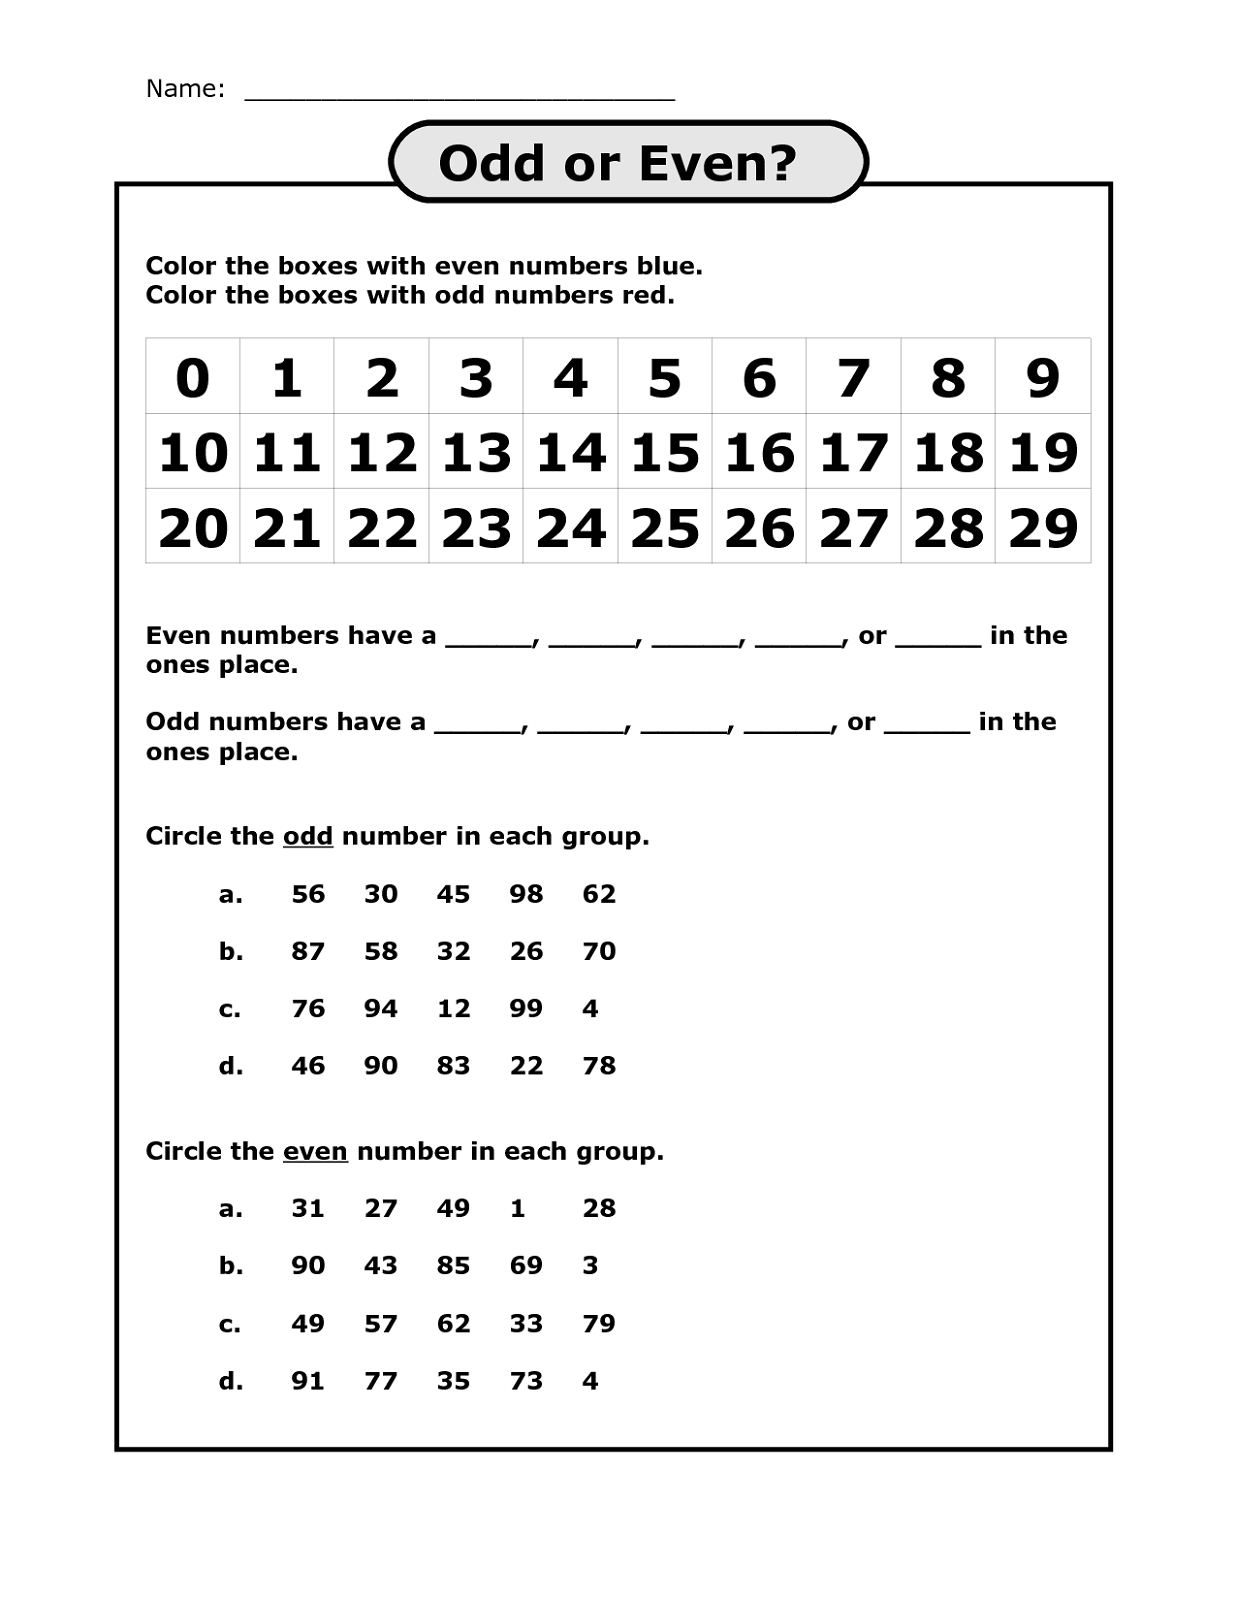 Odd and Even Worksheets for Kids  Activity Shelter For Odds And Even Worksheet